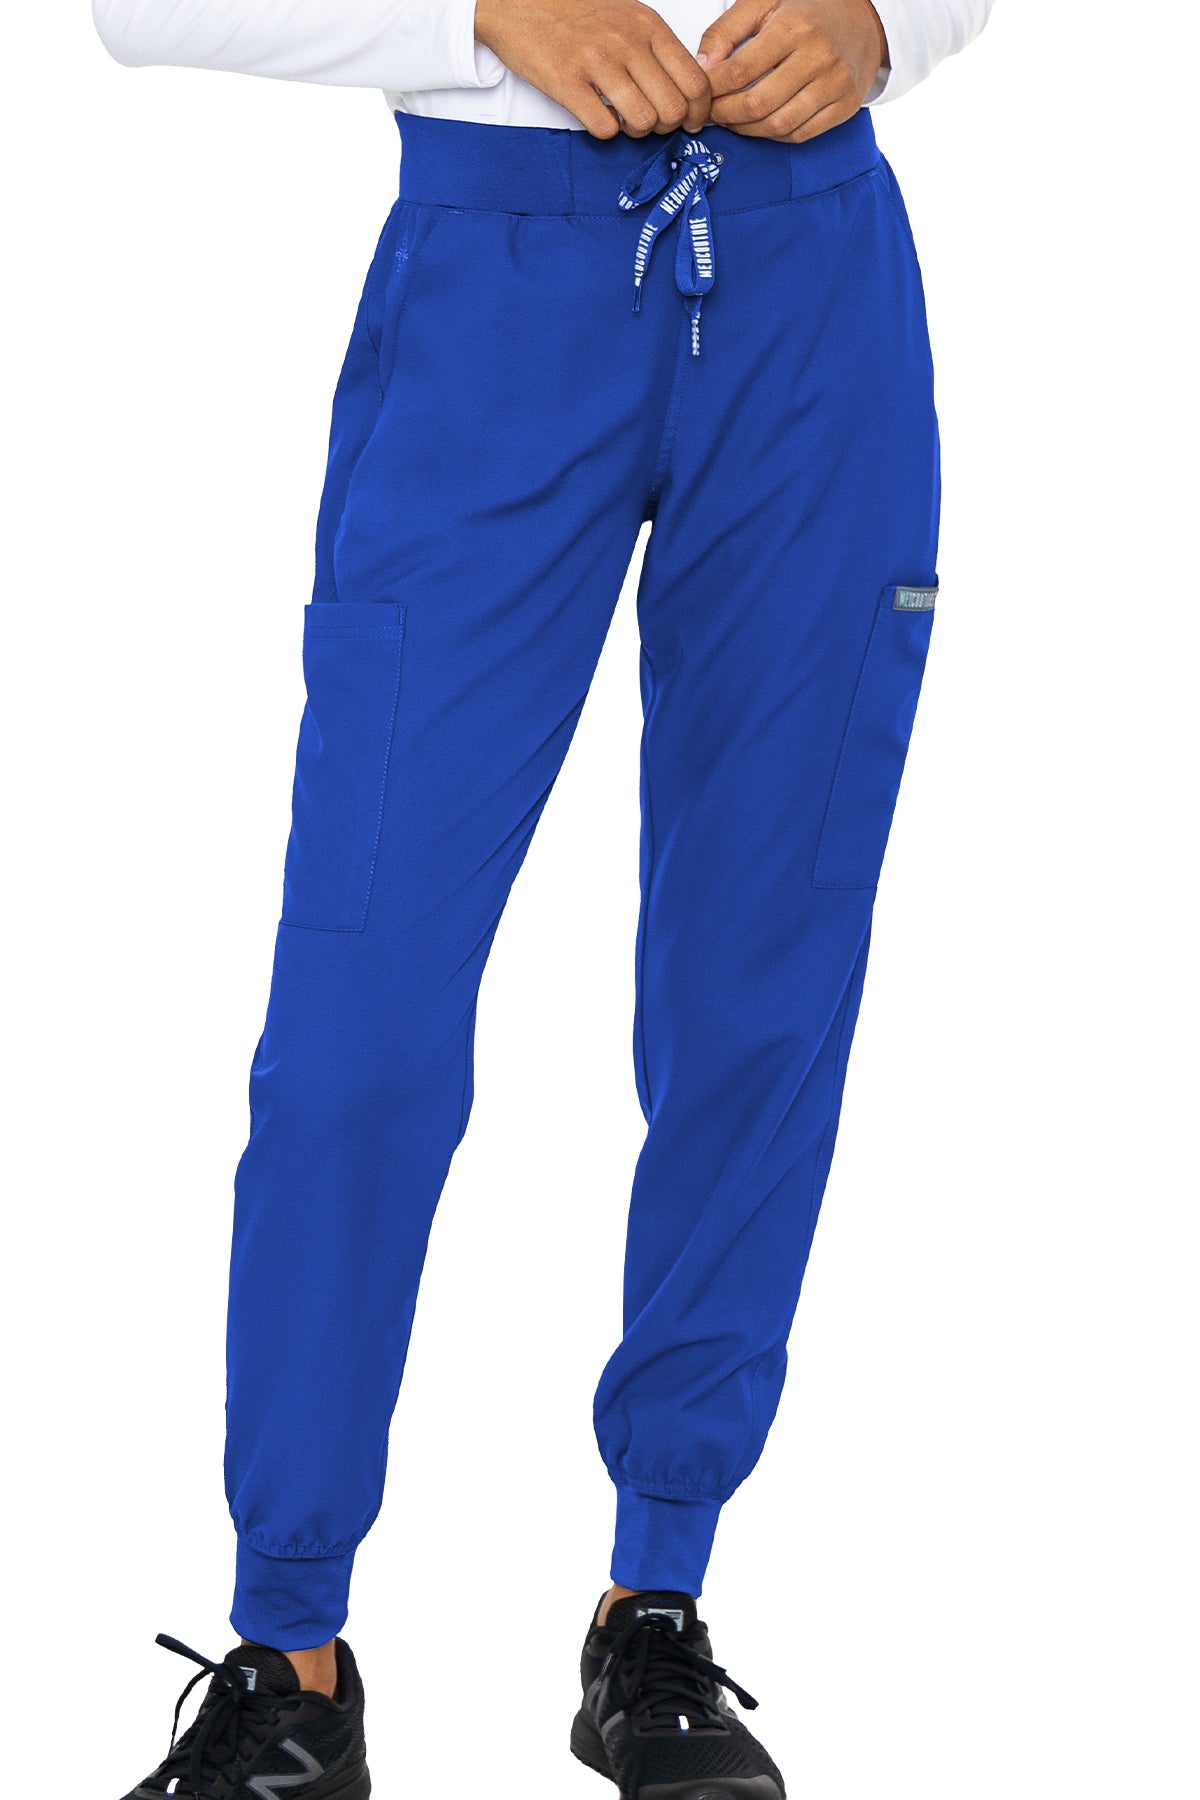 Med Couture Scrub Pants Insight Jogger Pant in Royal at Parker's Clothing and Shoes.